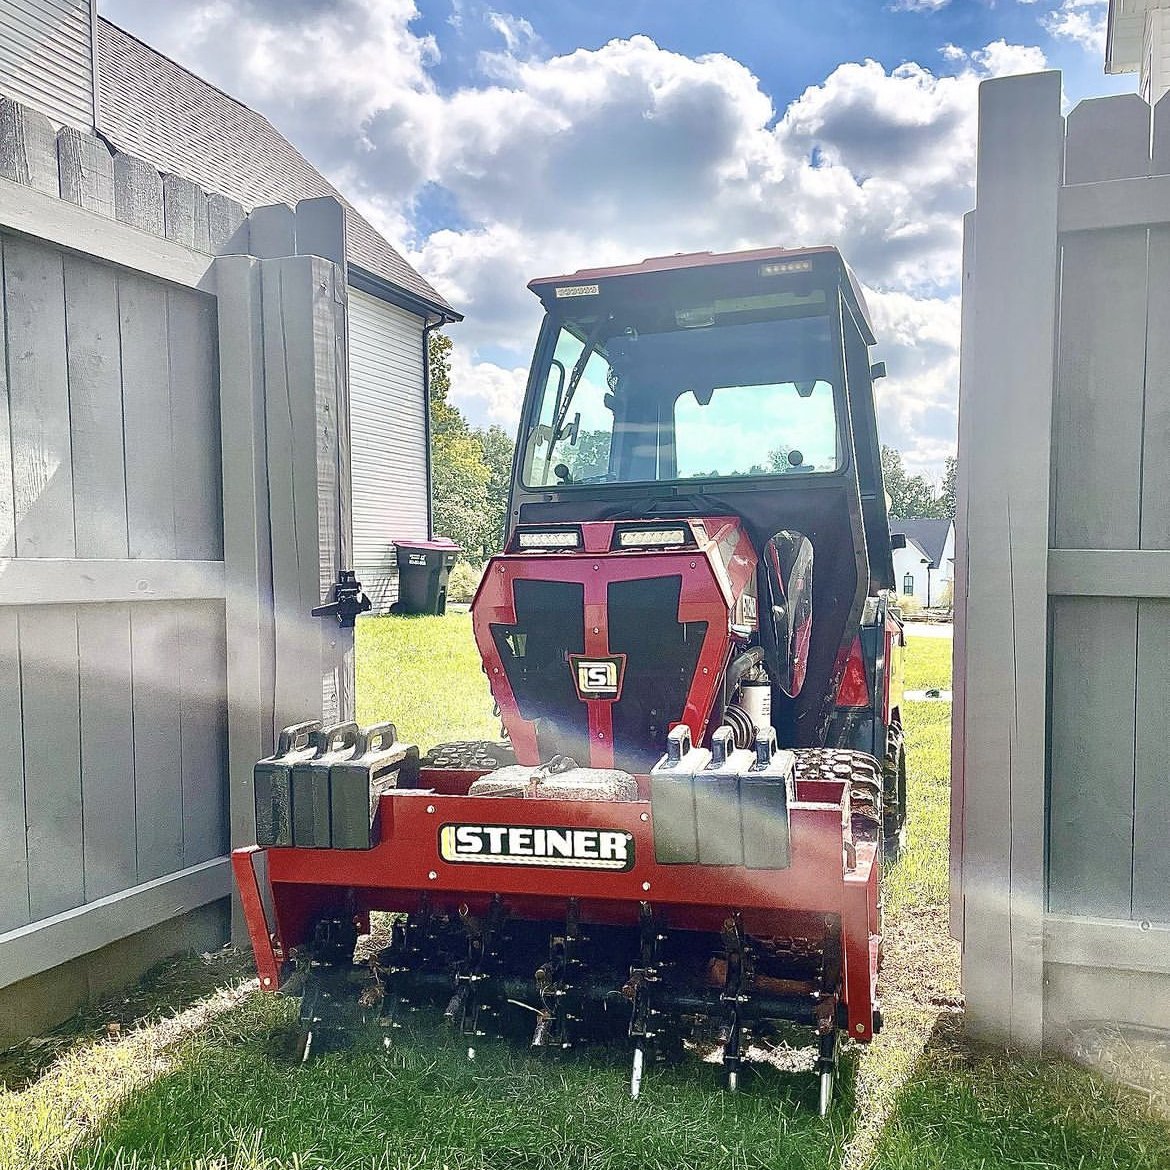 Did you aerate your lawn this fall? We know our friends at Burkhart Lawn Care sure did 😉 #Aeration #Aerate #Steiner450 #SteinerTurf